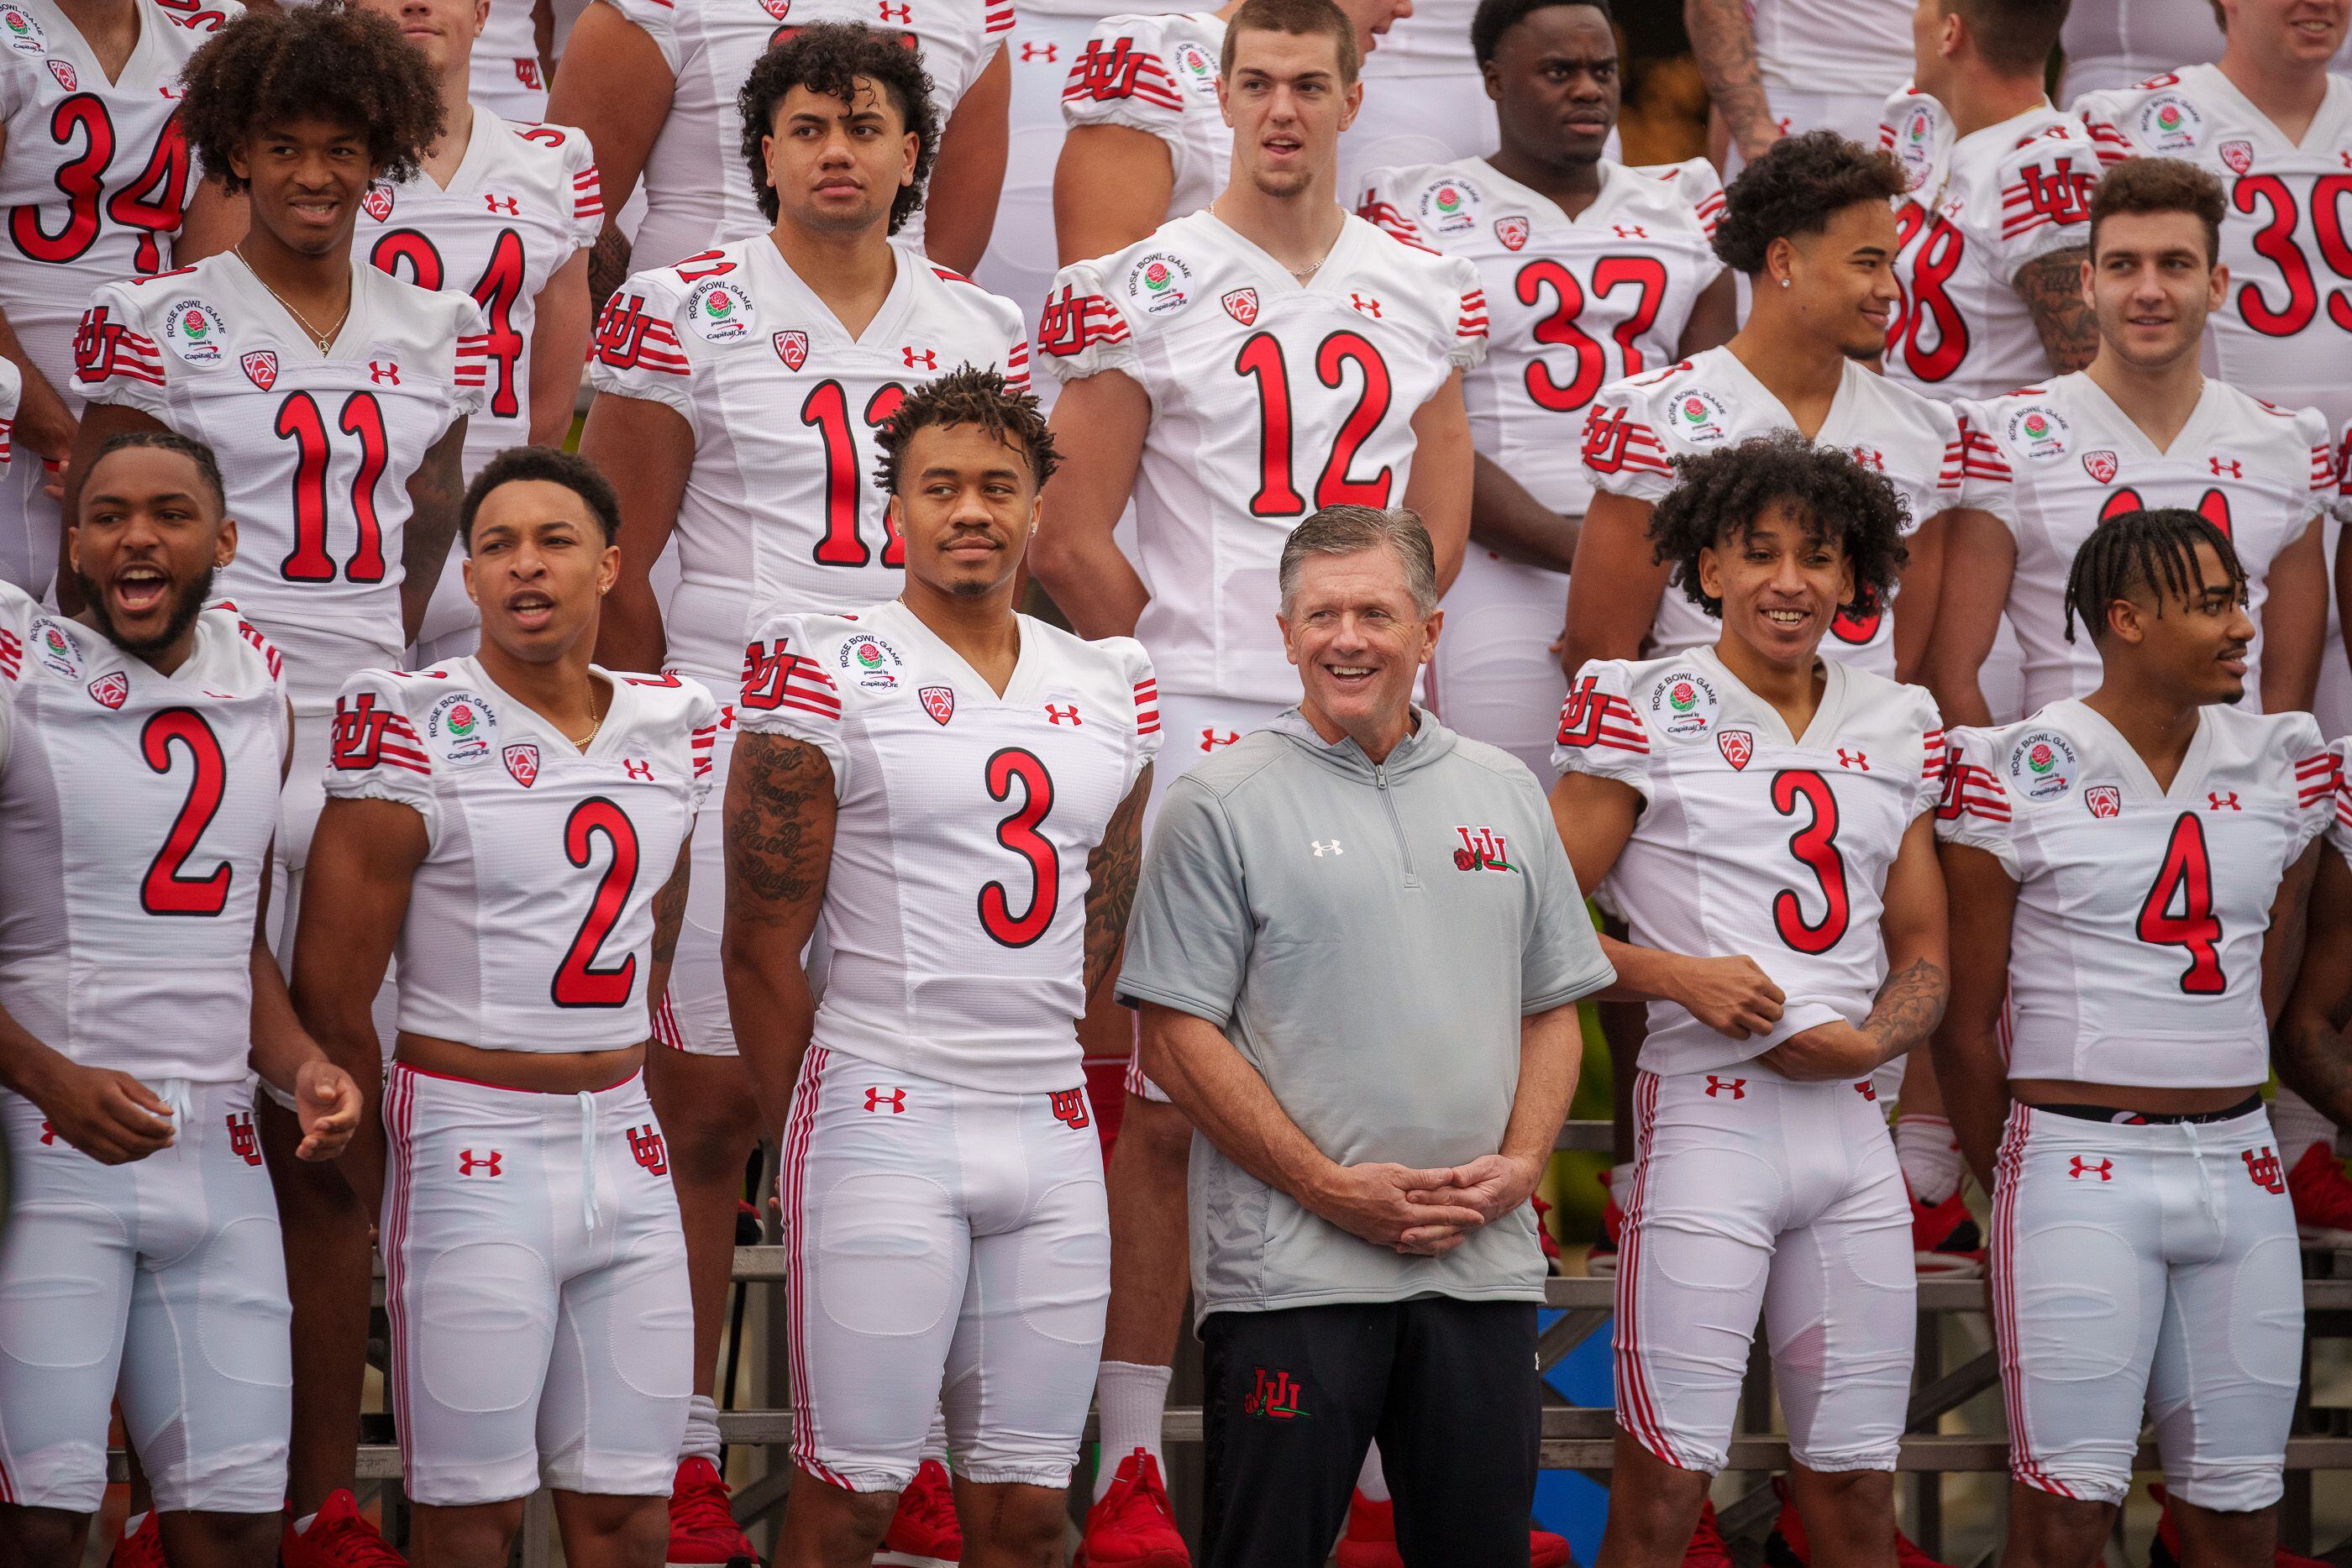 (Trent Nelson | The Salt Lake Tribune) Coach Kyle Whittingham and the Utah Utes pose for a team photo at the Rose Bowl in Pasadena, Calif., on Thursday, Dec. 30, 2021.